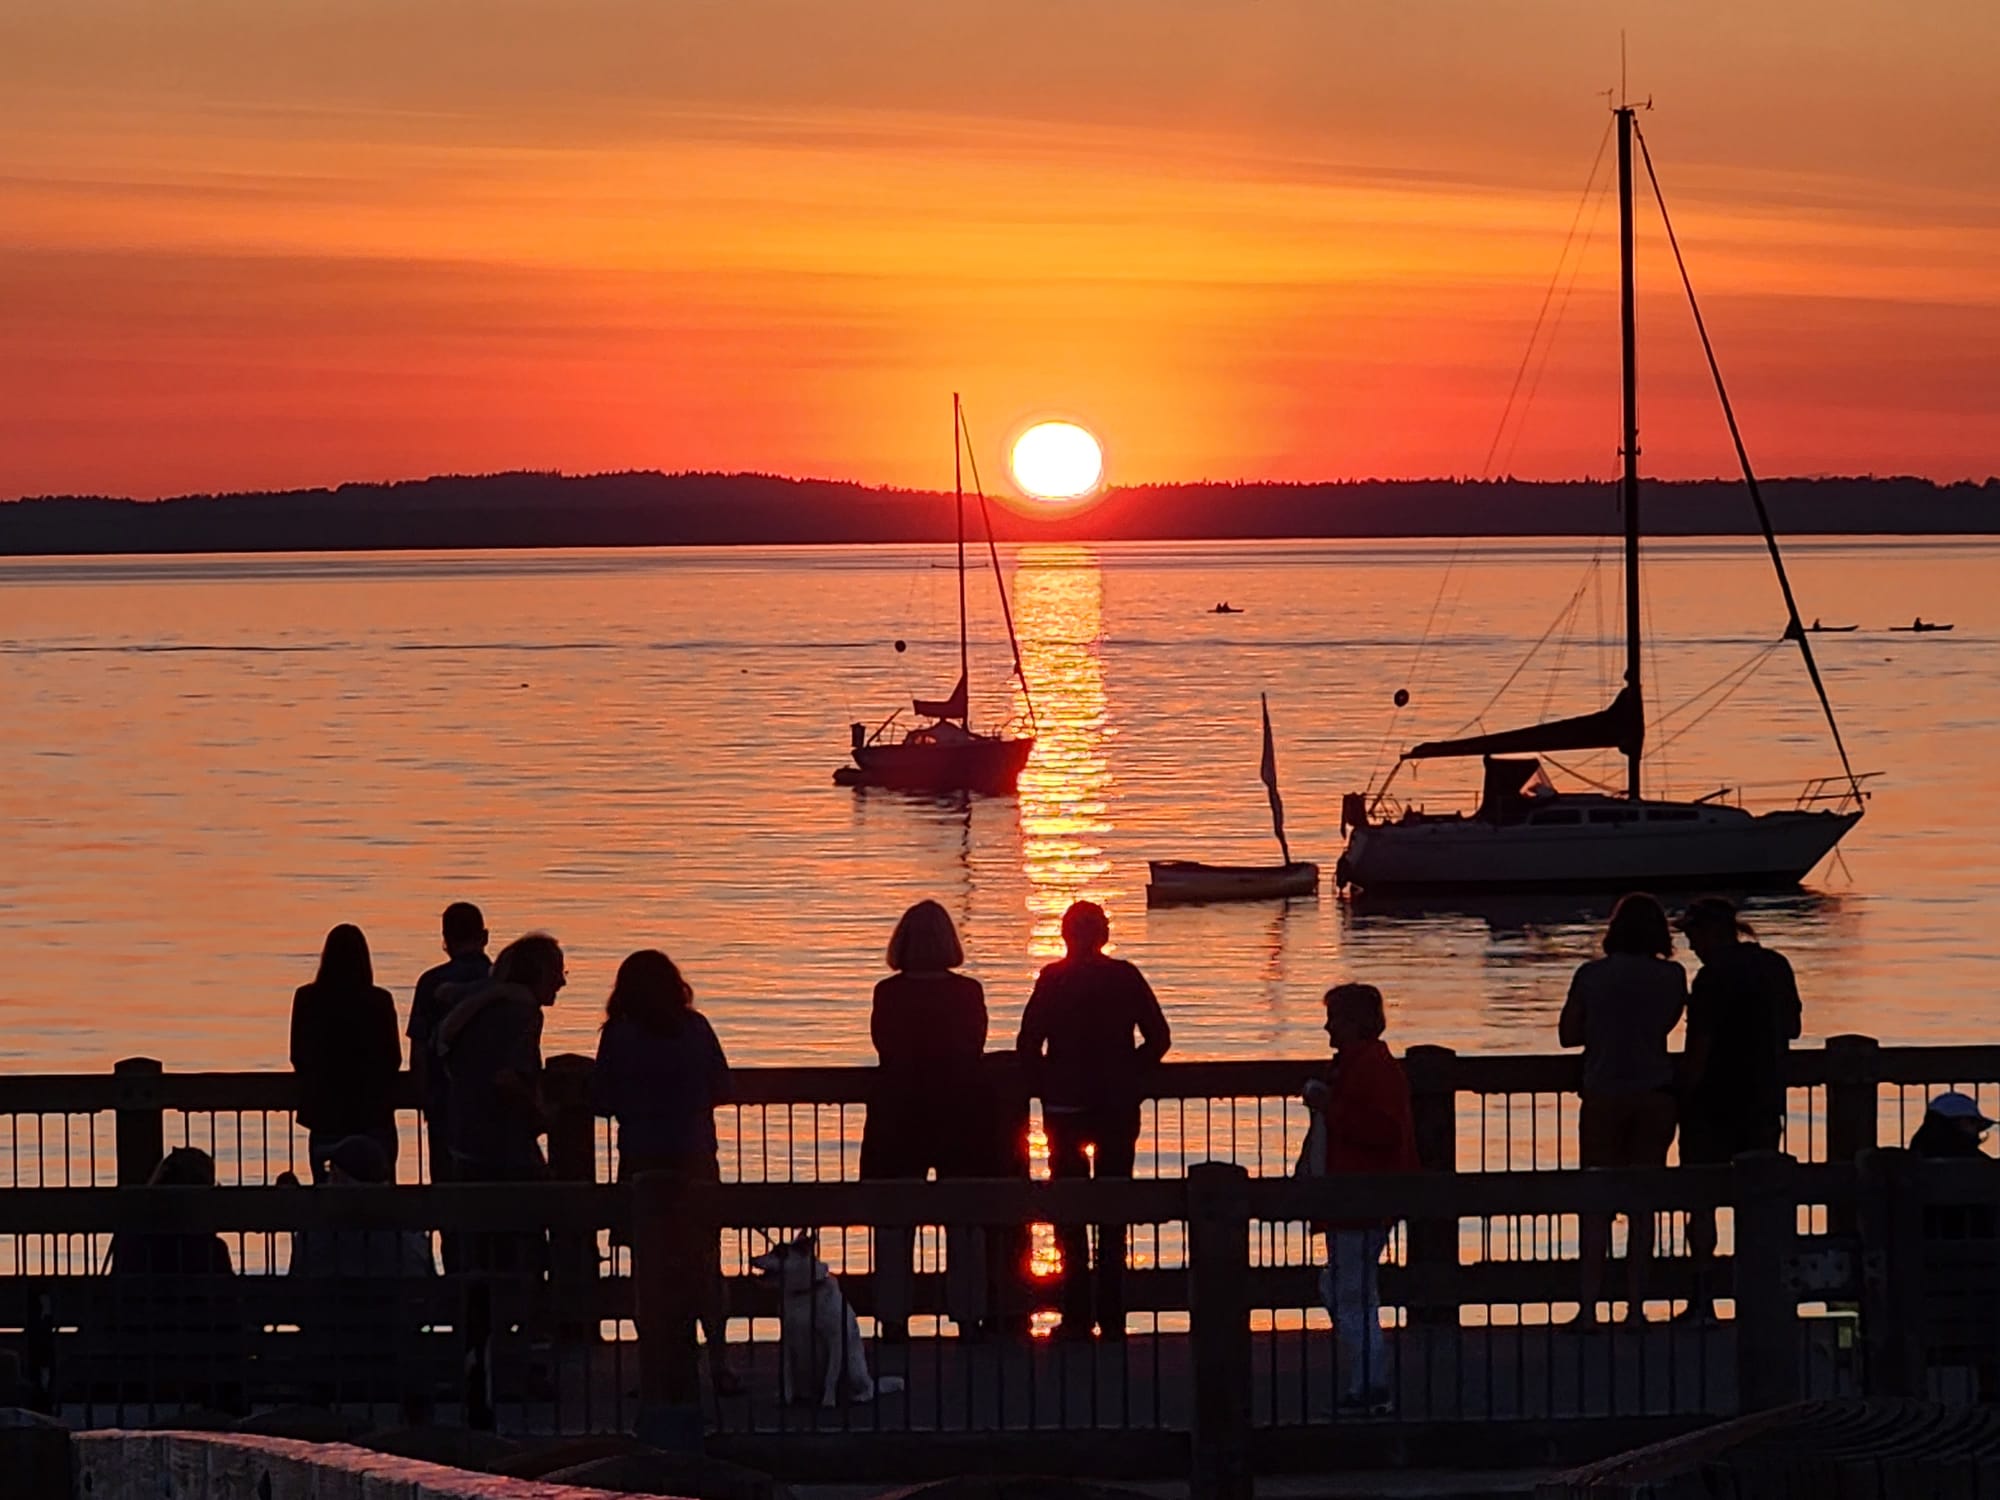 Silhouettes of people standing on a dock looking at boats on Bellingham Bay during sunset.